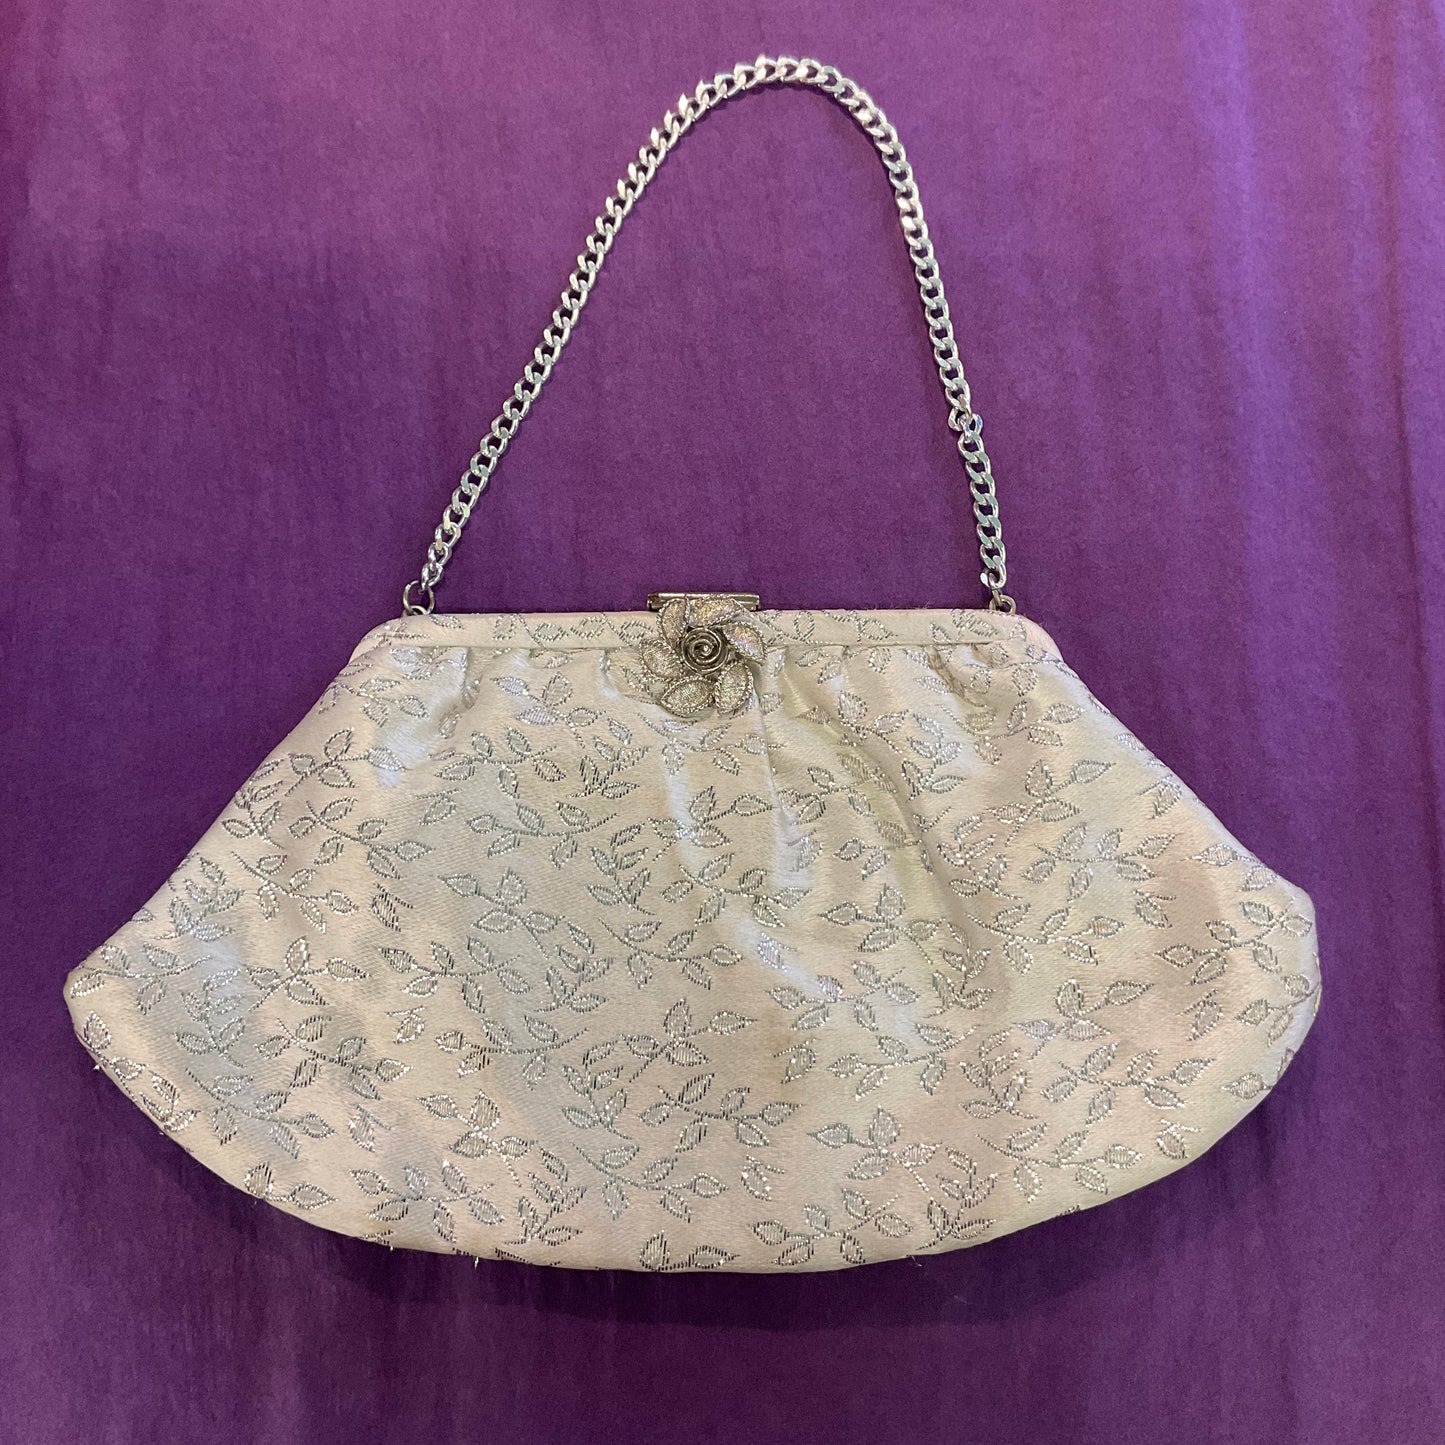 Vintage 1950s White and silver Brocade Evening Bag